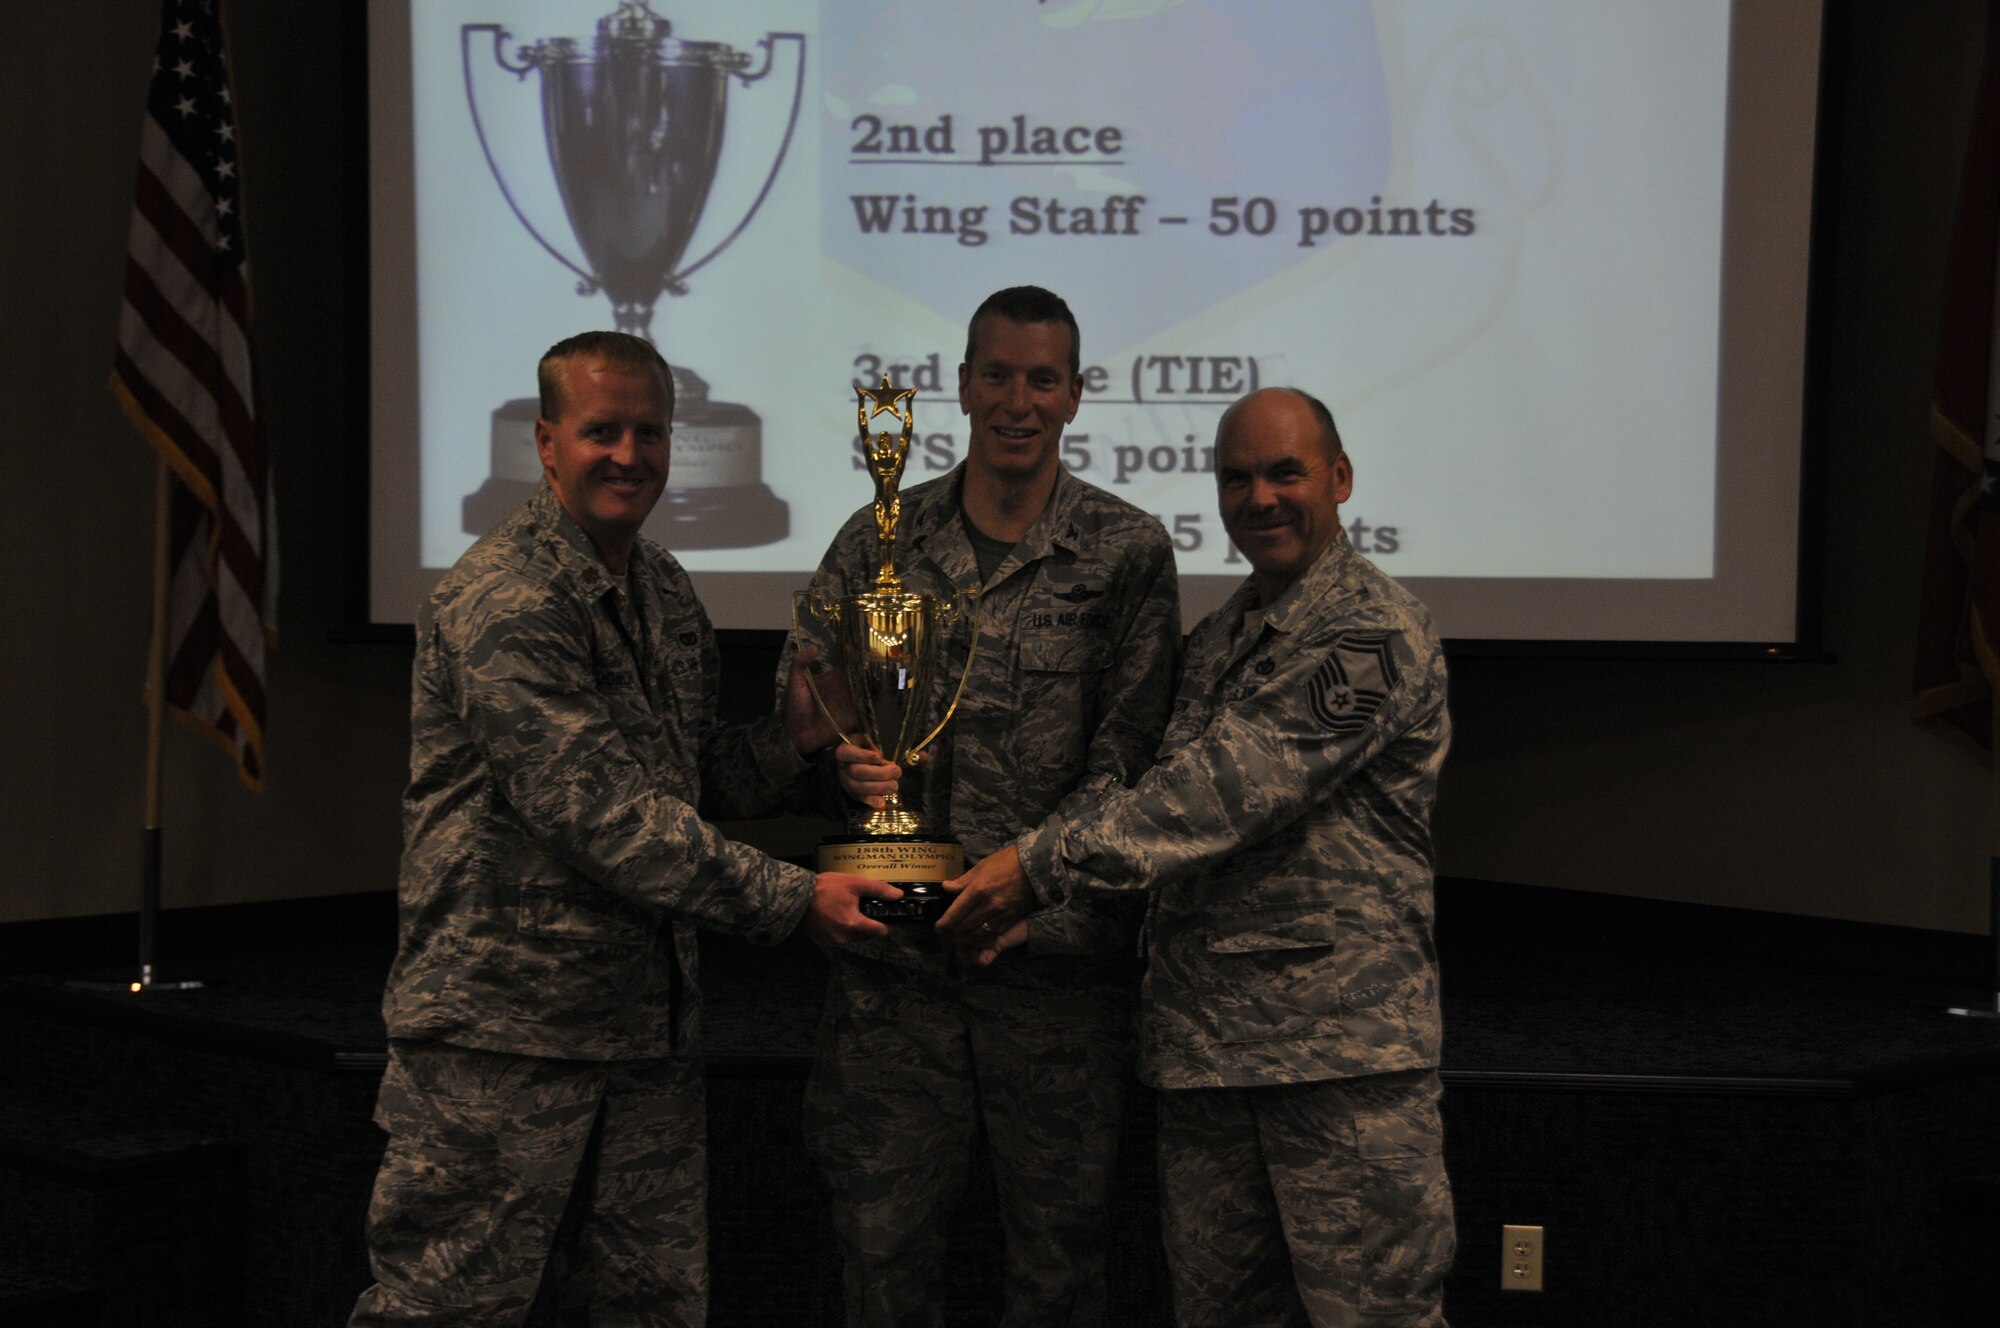 Col. Mark Anderson, 188th Wing commander, middle, presents the Wingman Day championship trophy to Maj. Drew Donohoe, left, and Senior Master Sgt. Gary Skelton, both members of the 188th Civil Engineering Squadron, during a commander’s call at Ebbing Air National Guard Base, Fort Smith, Arkansas, Aug. 3, 2014. The 188th CES won a tiebreaker with Wing Staff by scoring 50 points and logging points in more events to take the 2014 Wingman Day title. (U.S. Air National Guard photo by Staff Sgt. John Suleski/released)